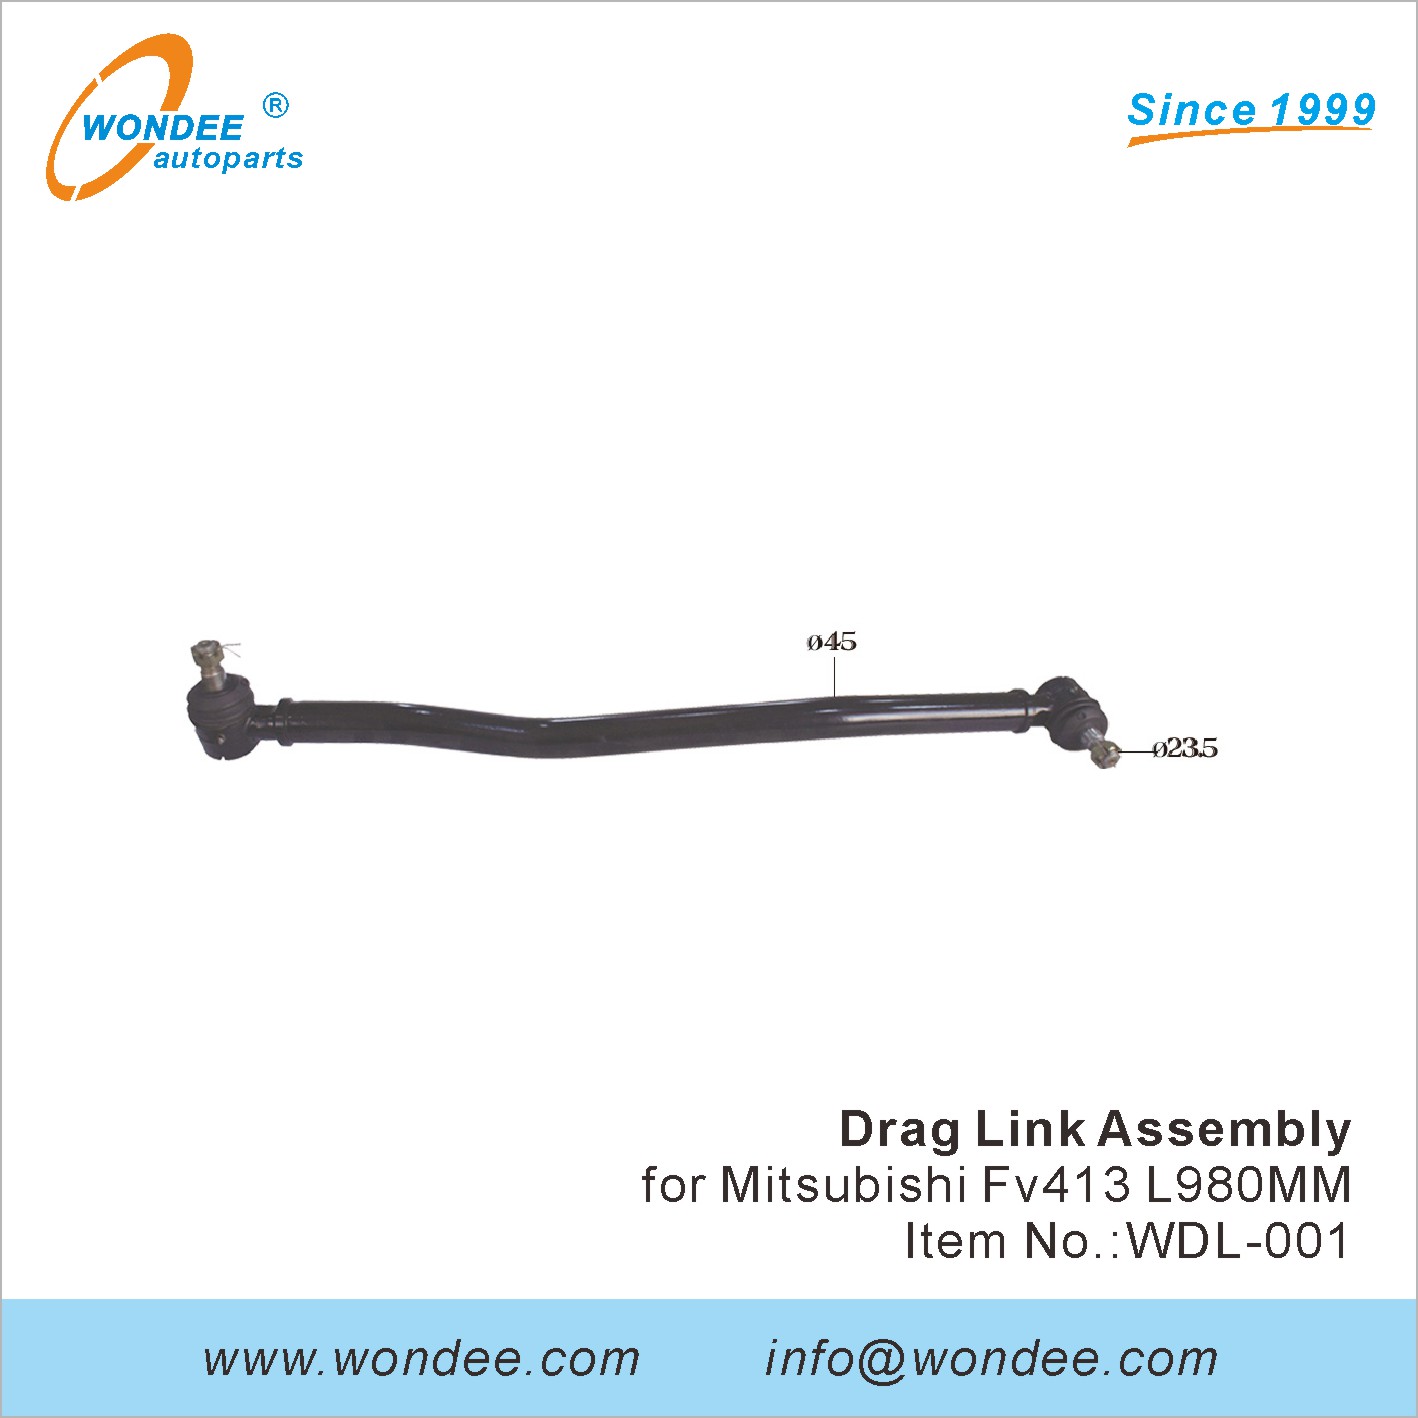 WONDEE drag link assembly (1)